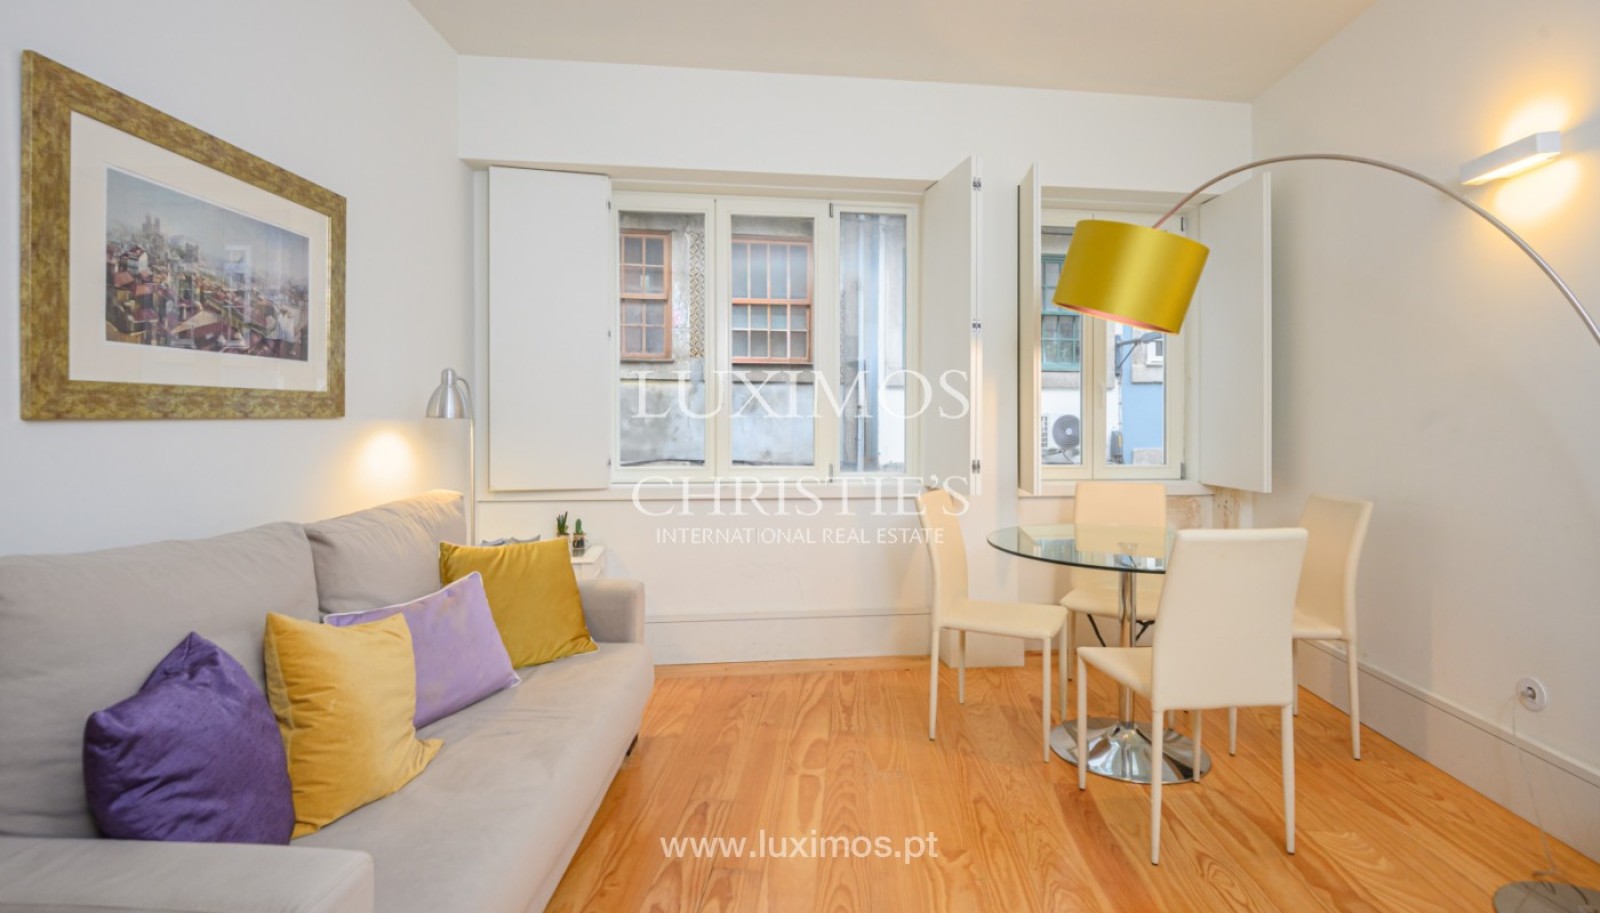 One-bedroom flat with interior patio, for sale, in historic center, Porto, Portugal_248887